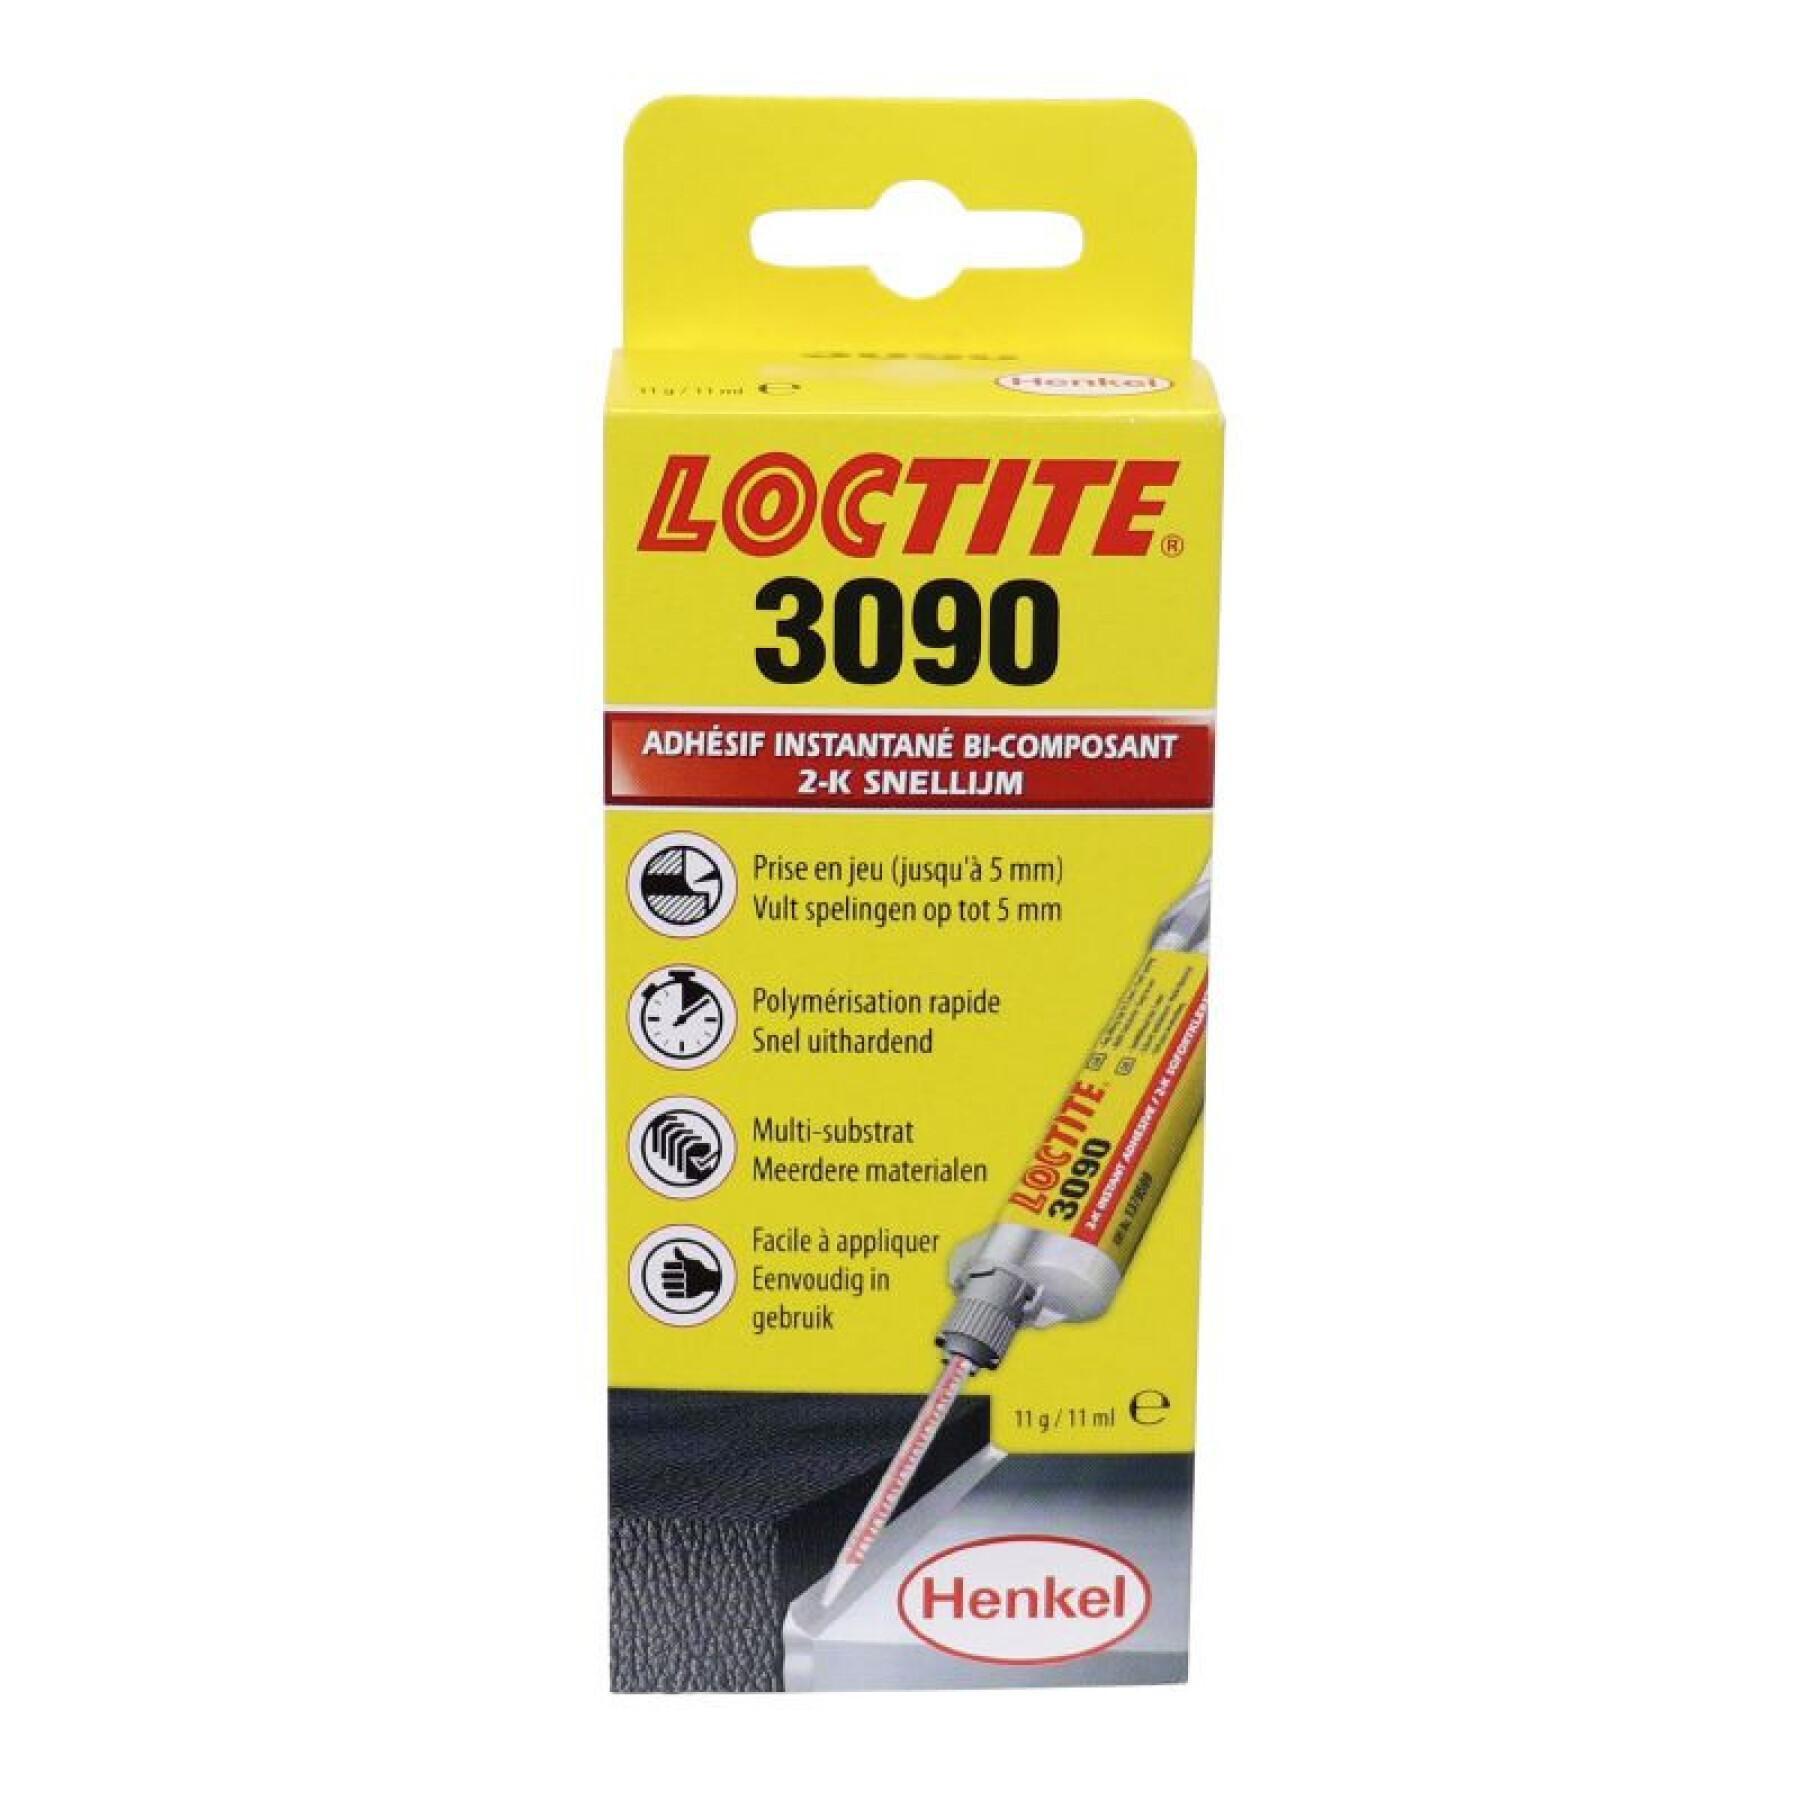 Two-component adhesive with gap-filling Loctite